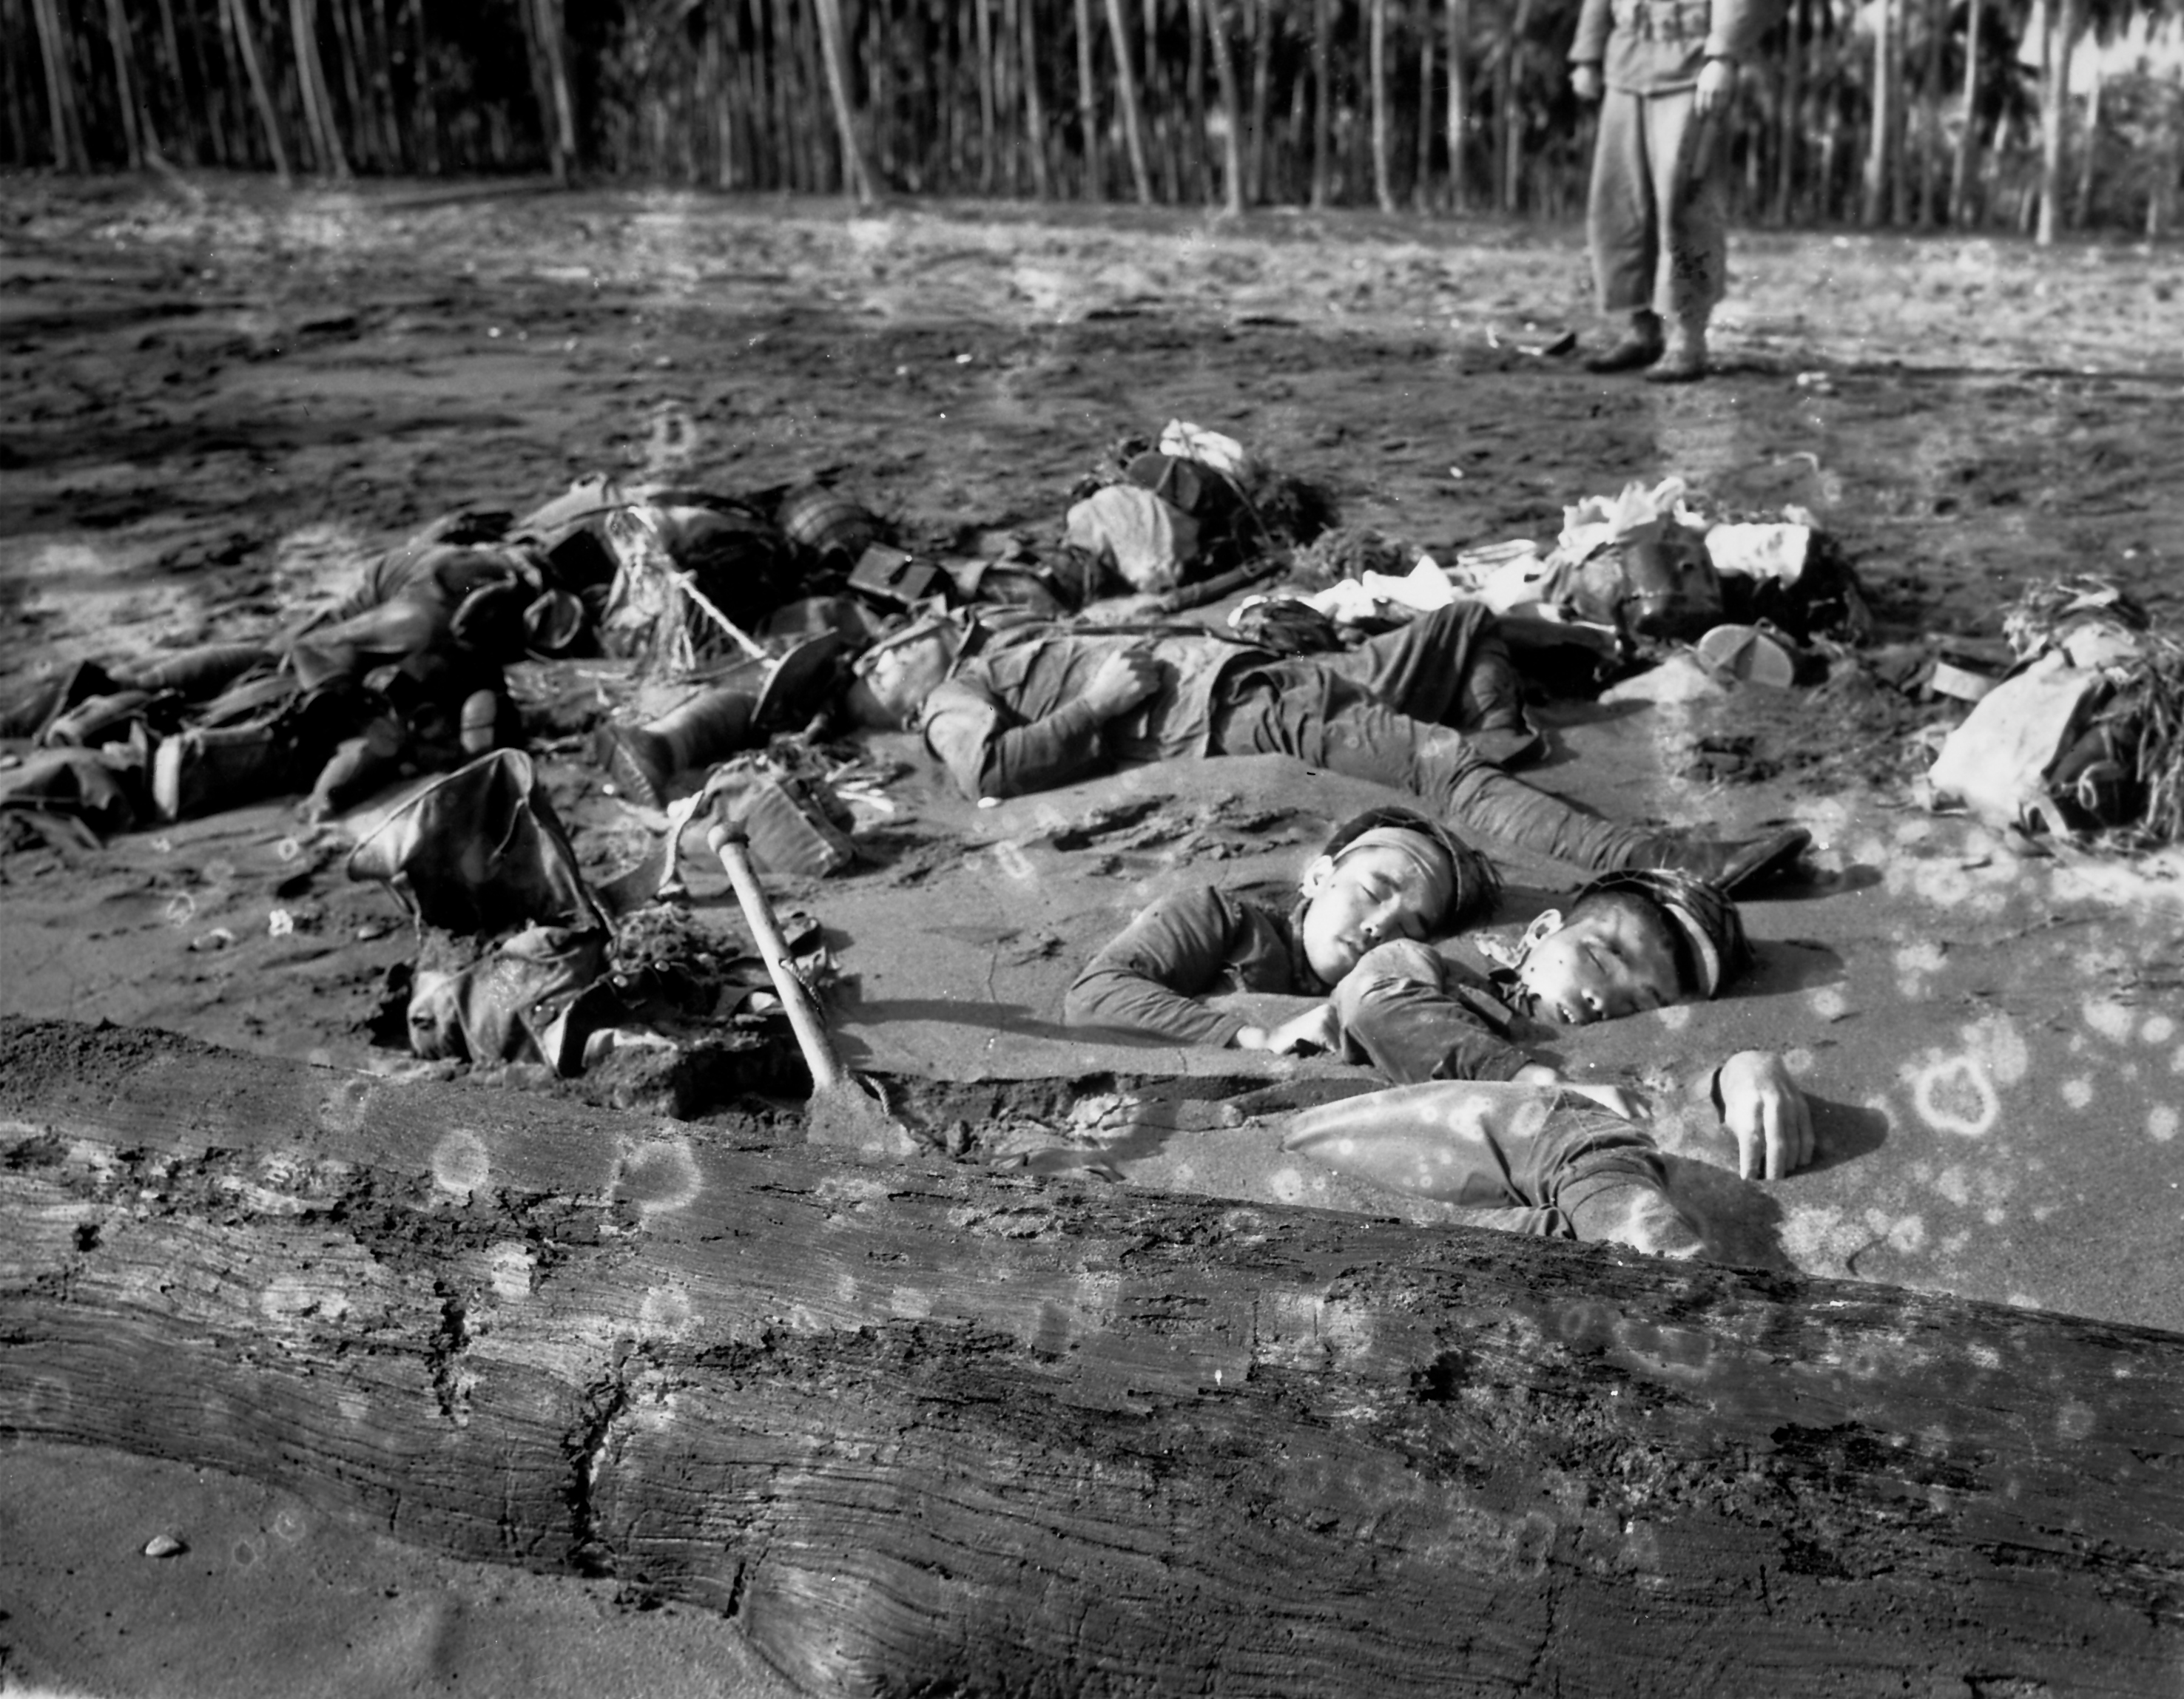 Corpses of Japanese soldiers half-buried in the tidal sands of the Tenaru River. (The LIFE Picture Collection/Getty Images)